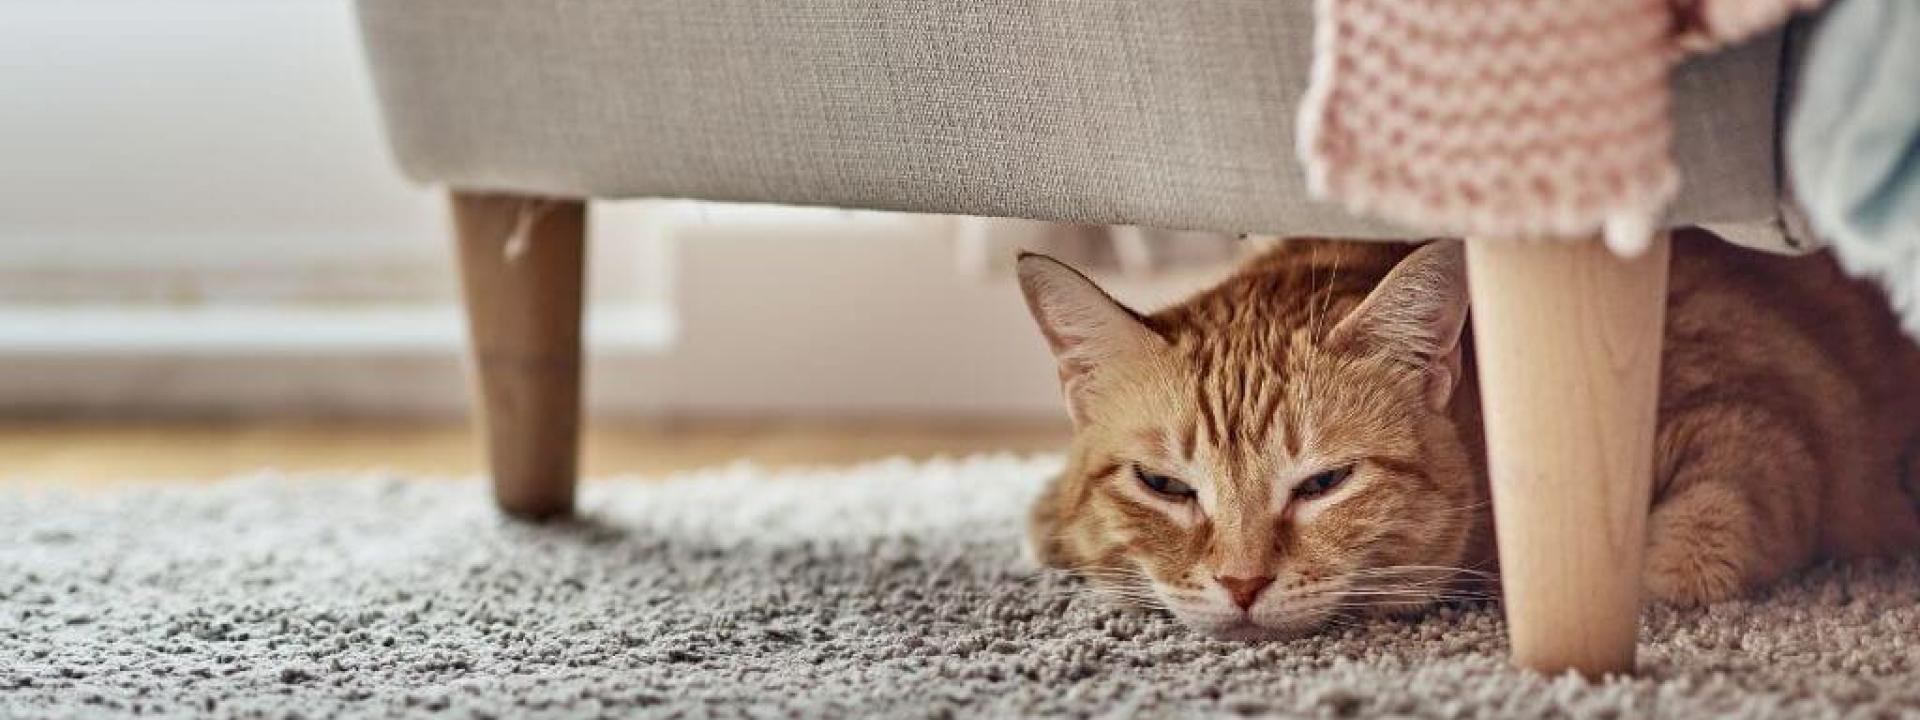 why cats hide pain